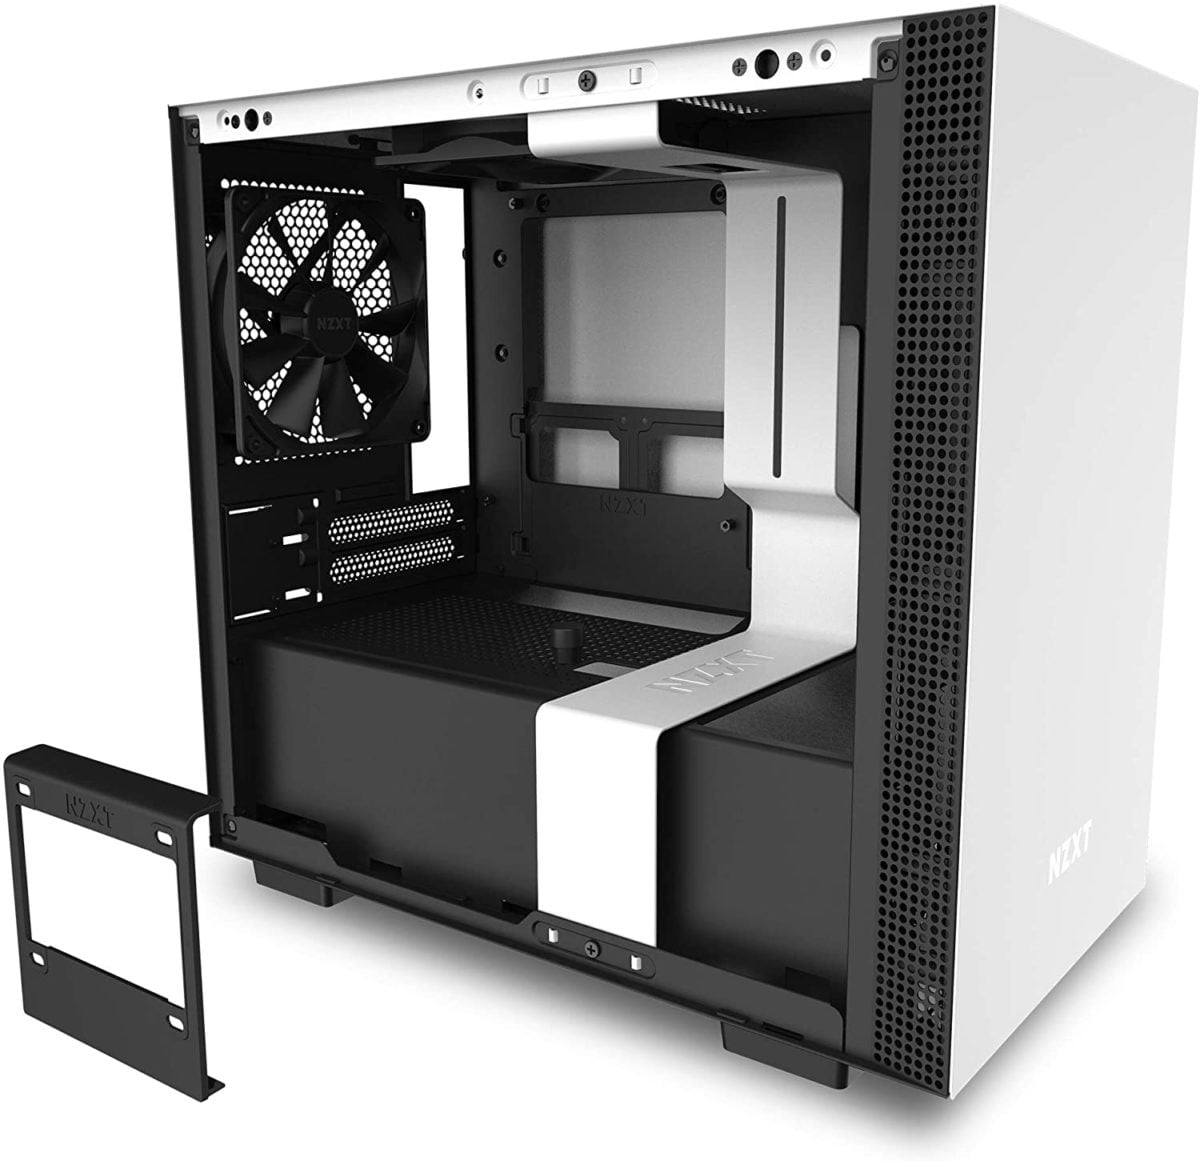 Nzxt H210